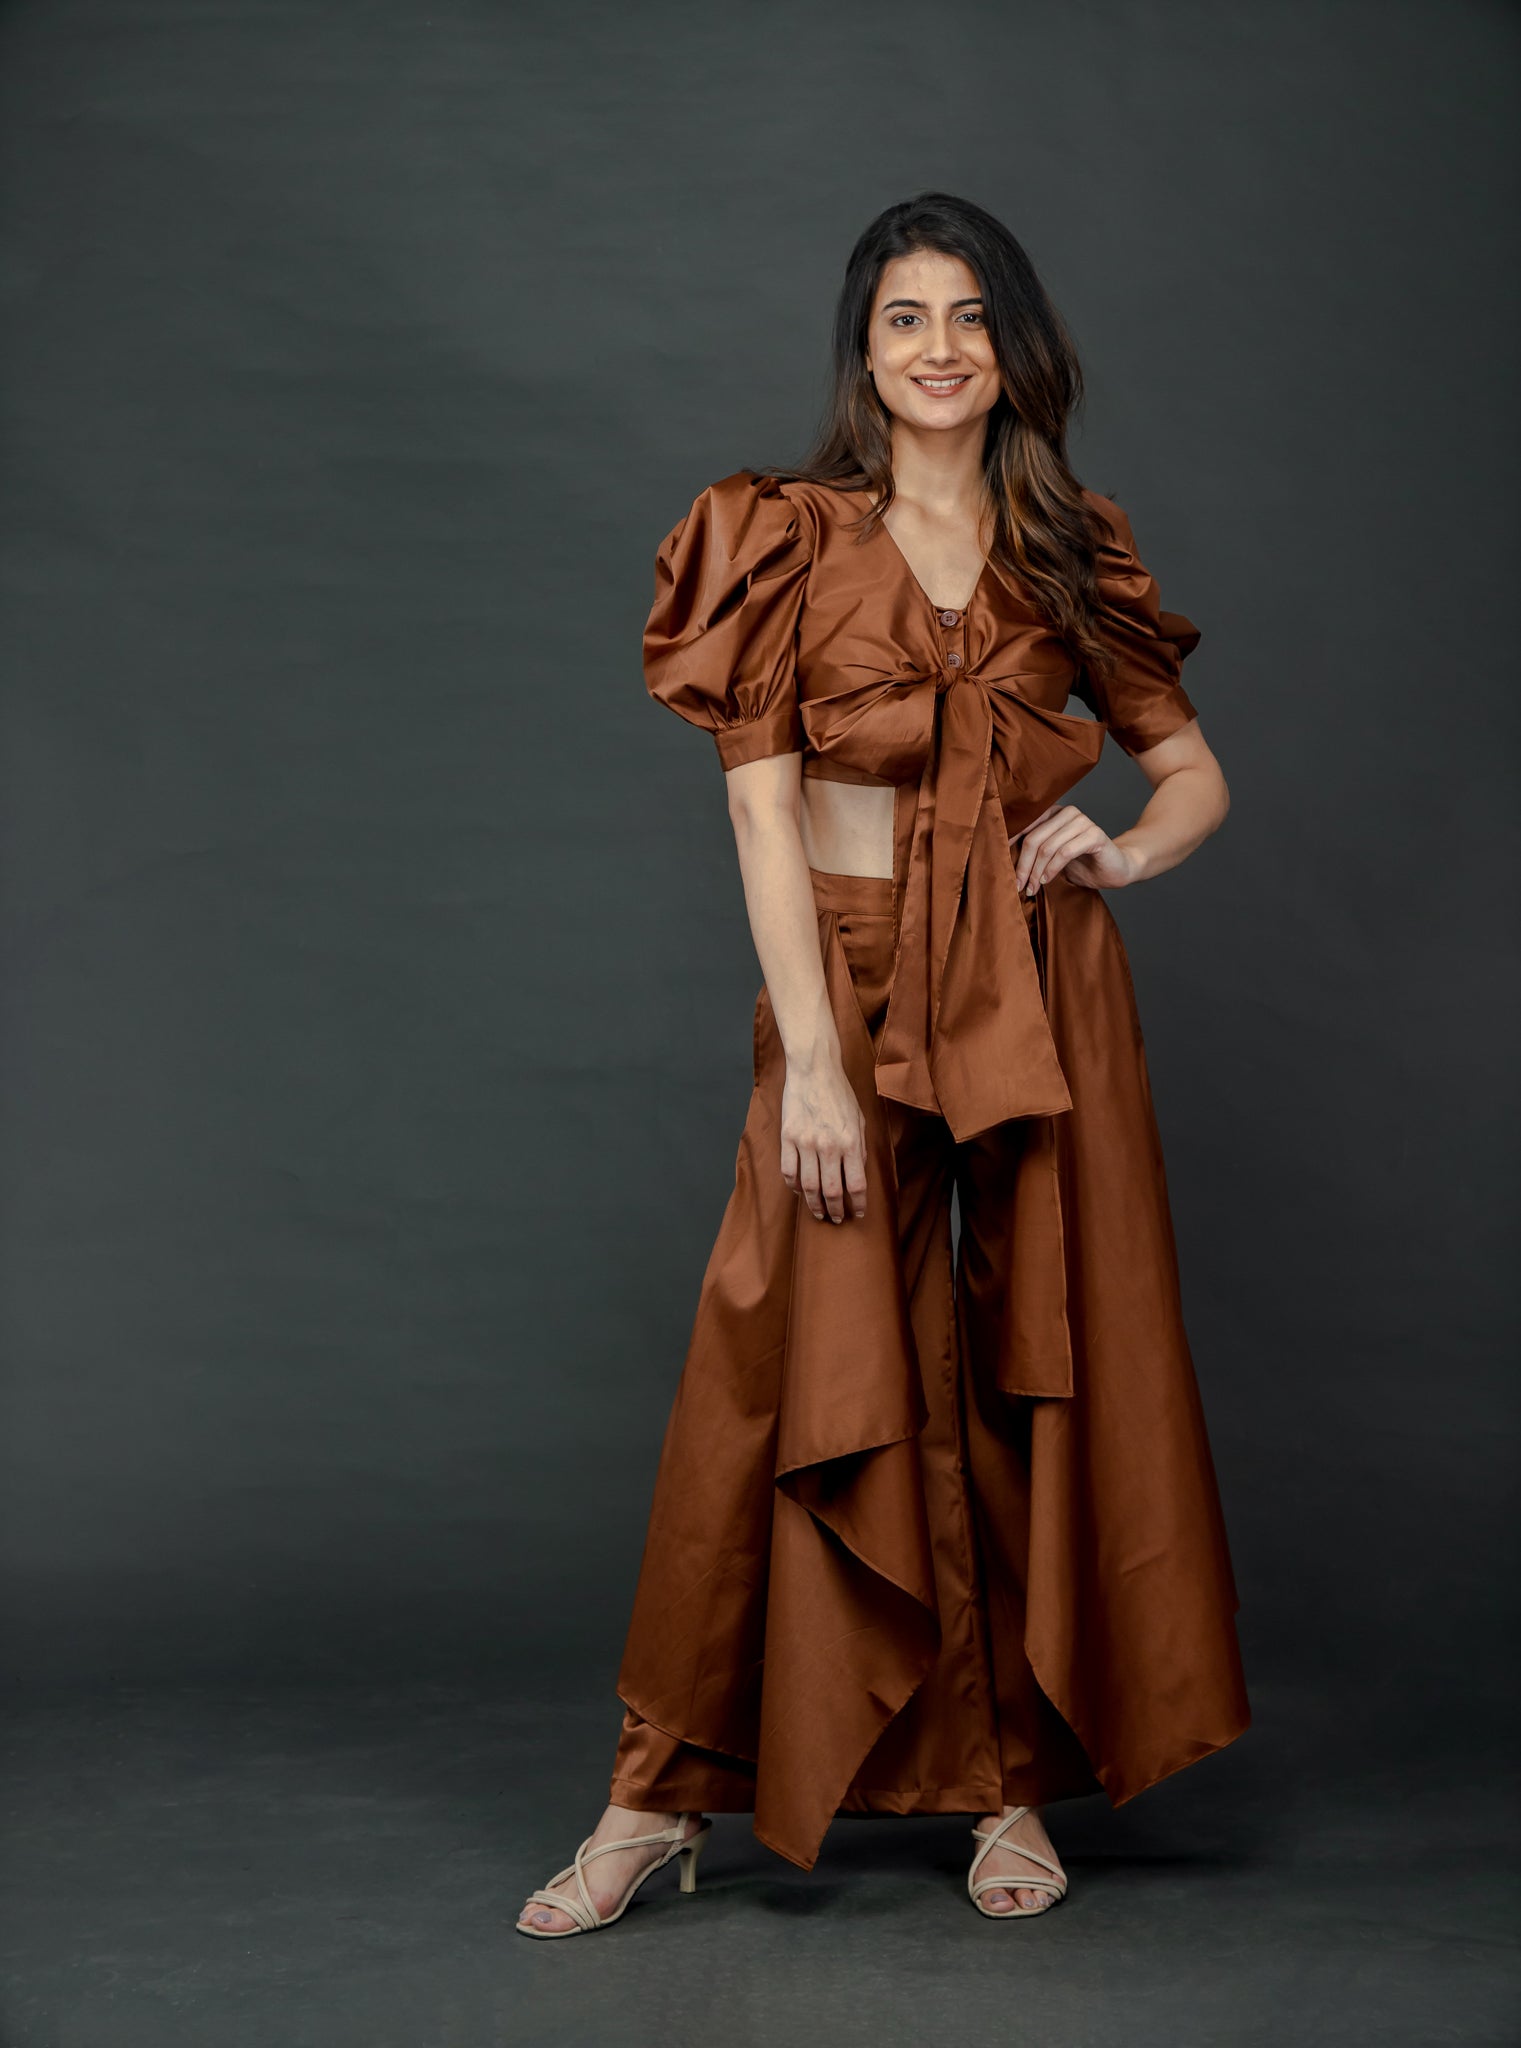 CHOCOLATE BROWN PUFFED SLEEVES TOP WITH TIE UP DETAIL PAIRED WITH FLARED PANTS